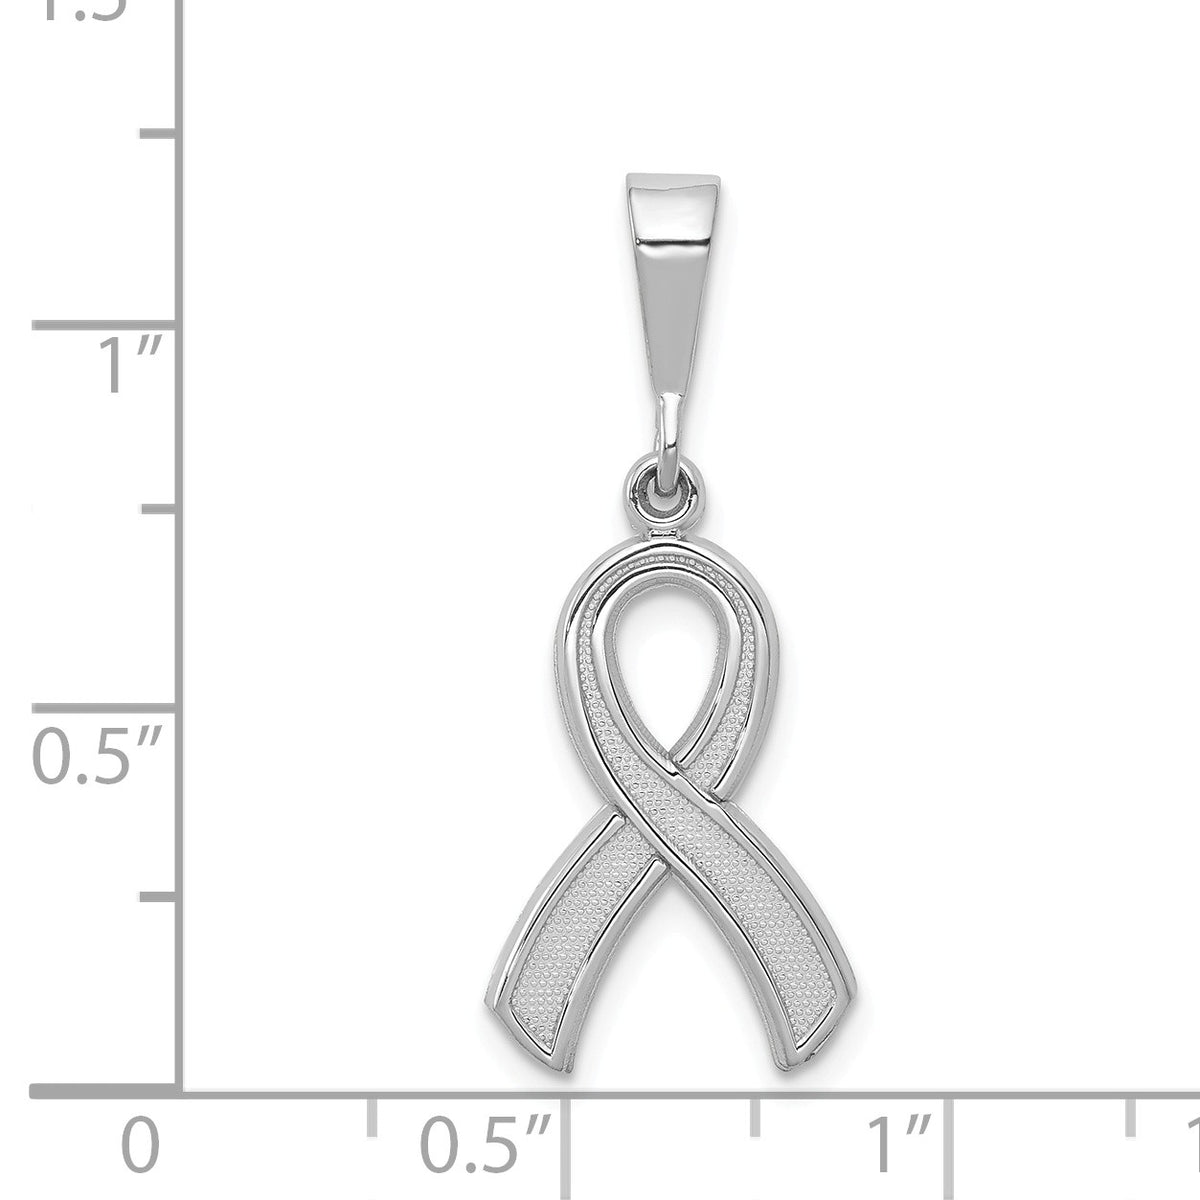 Alternate view of the 14k White Gold Polished and Satin Awareness Ribbon Pendant by The Black Bow Jewelry Co.